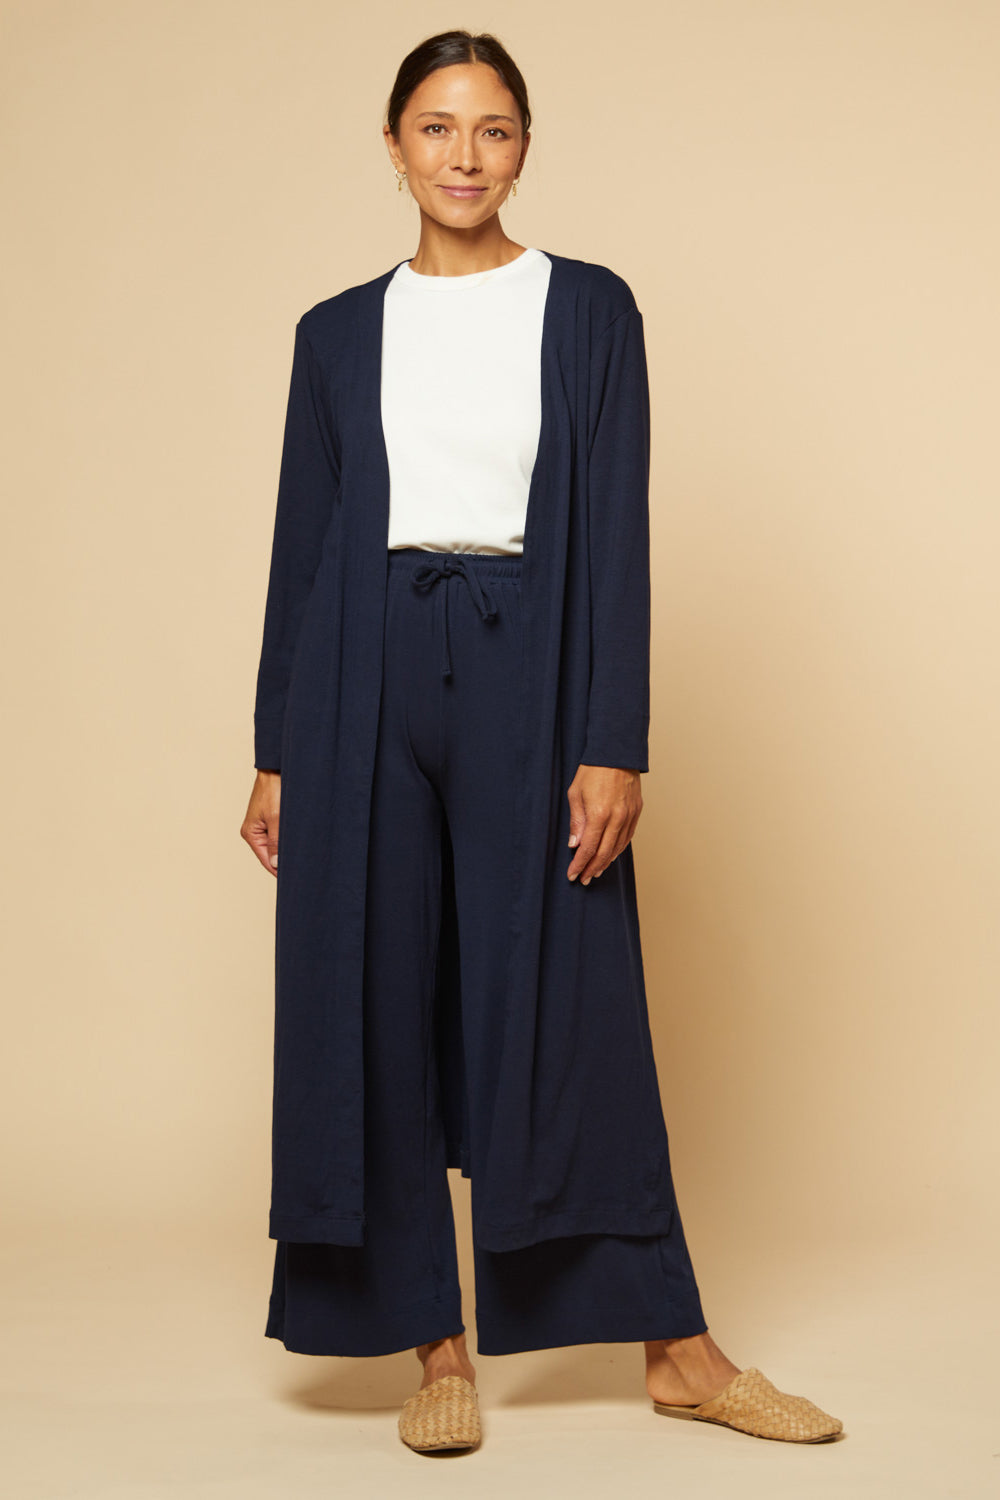 Wide Leg Stretch Pants in Navy